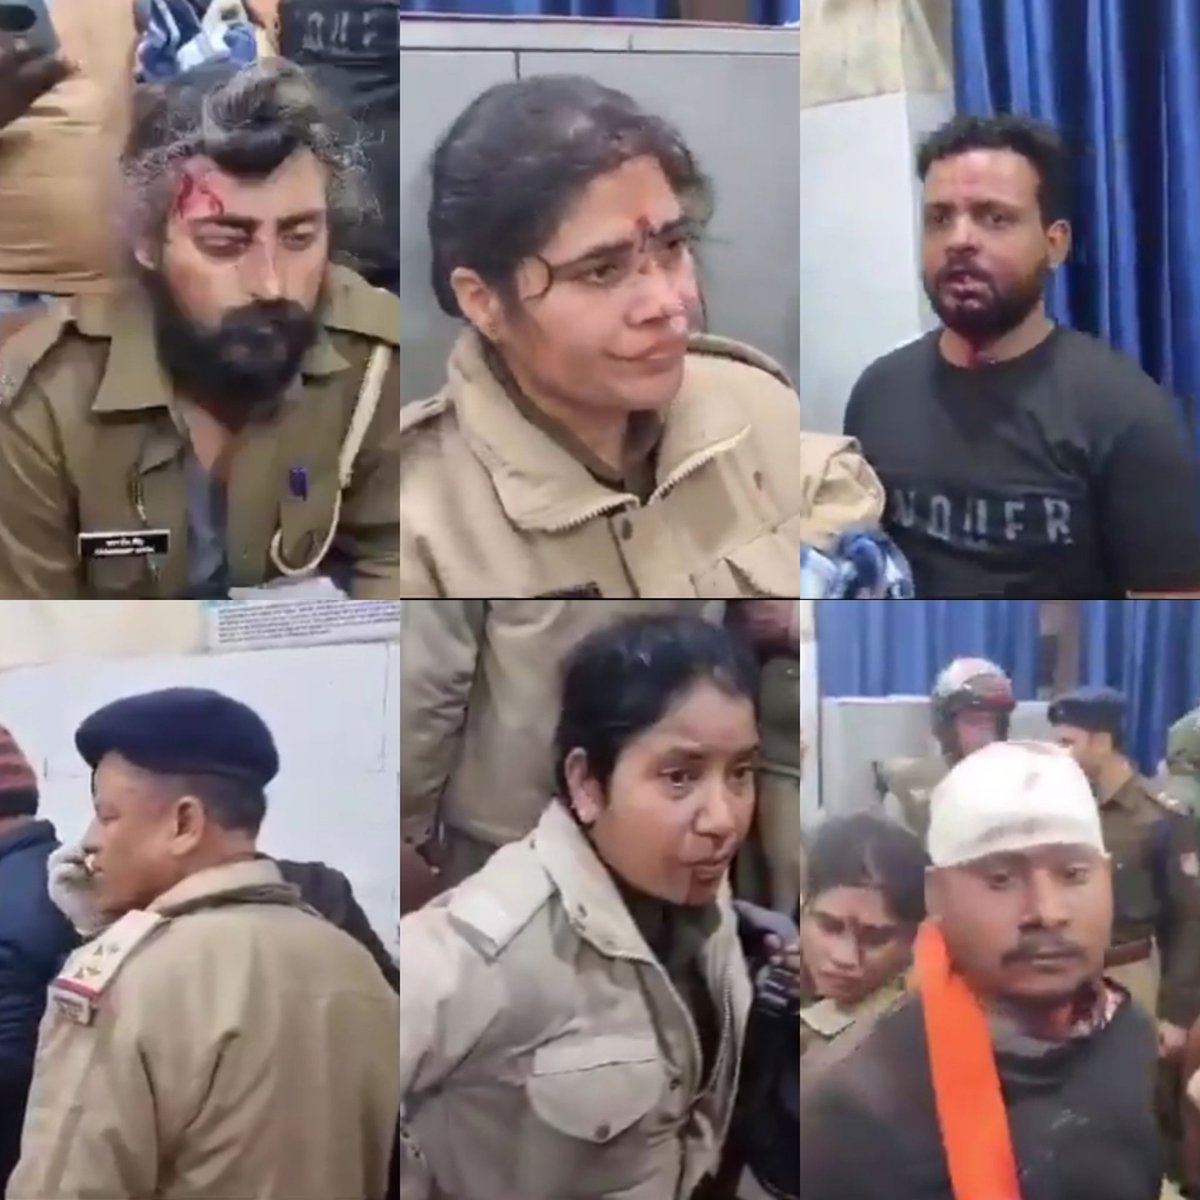 Be aware of #RadicalIslamicTerrorism

Pissfuls are so deviant, #Haldwani was attacked by #Jihadis. 

Hinduism and Bharat are more at risk from pseudo secular slaves. 

Don't let radical Islamic fundamentalism reach your neck!

#SaveHindusGlobally 
#WakeUpHindus